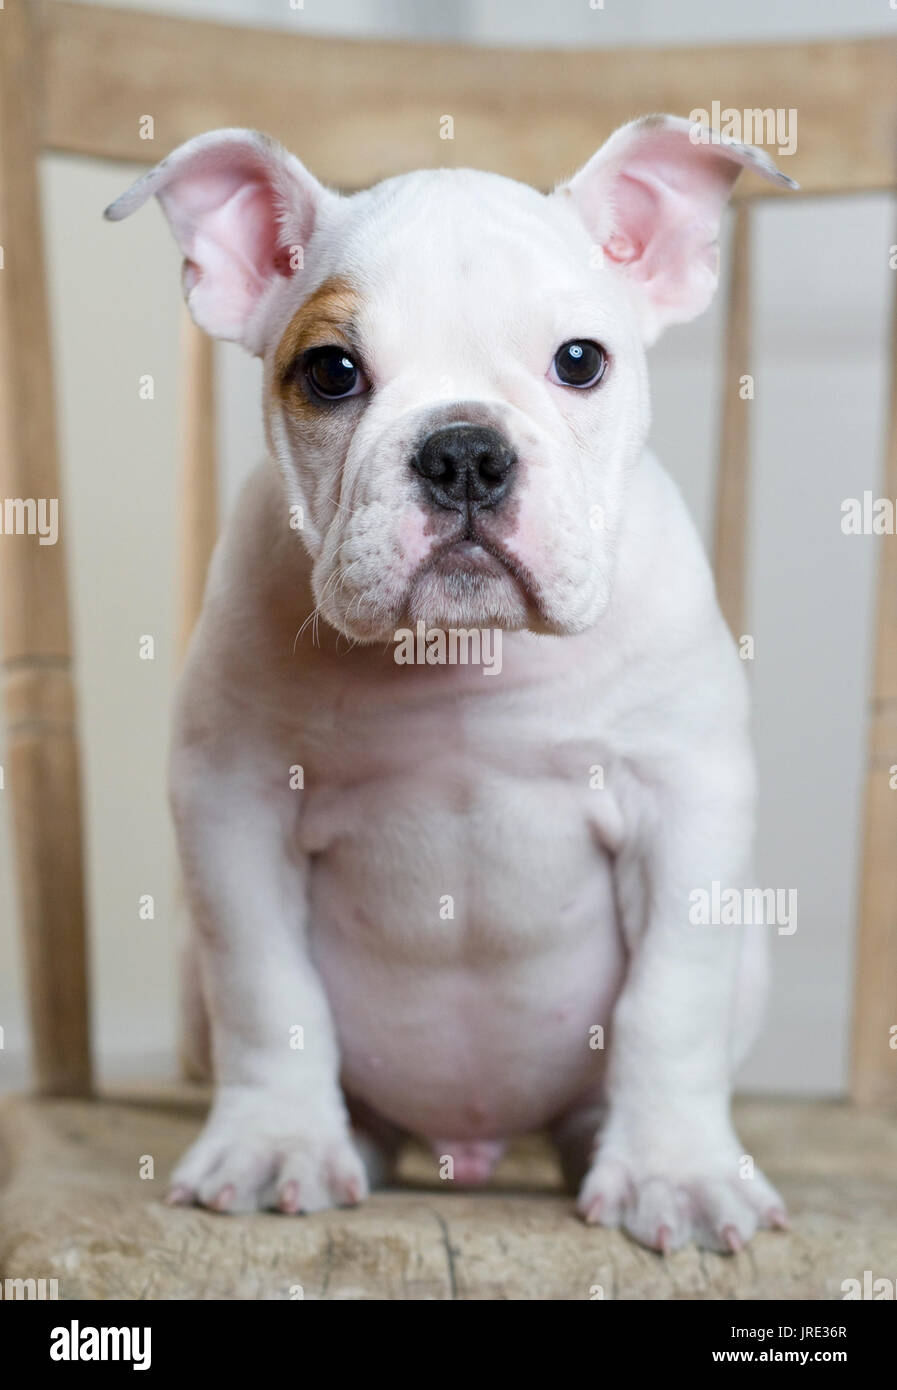 white bulldog puppy with brown eye patch situation on wooden chair Stock Photo